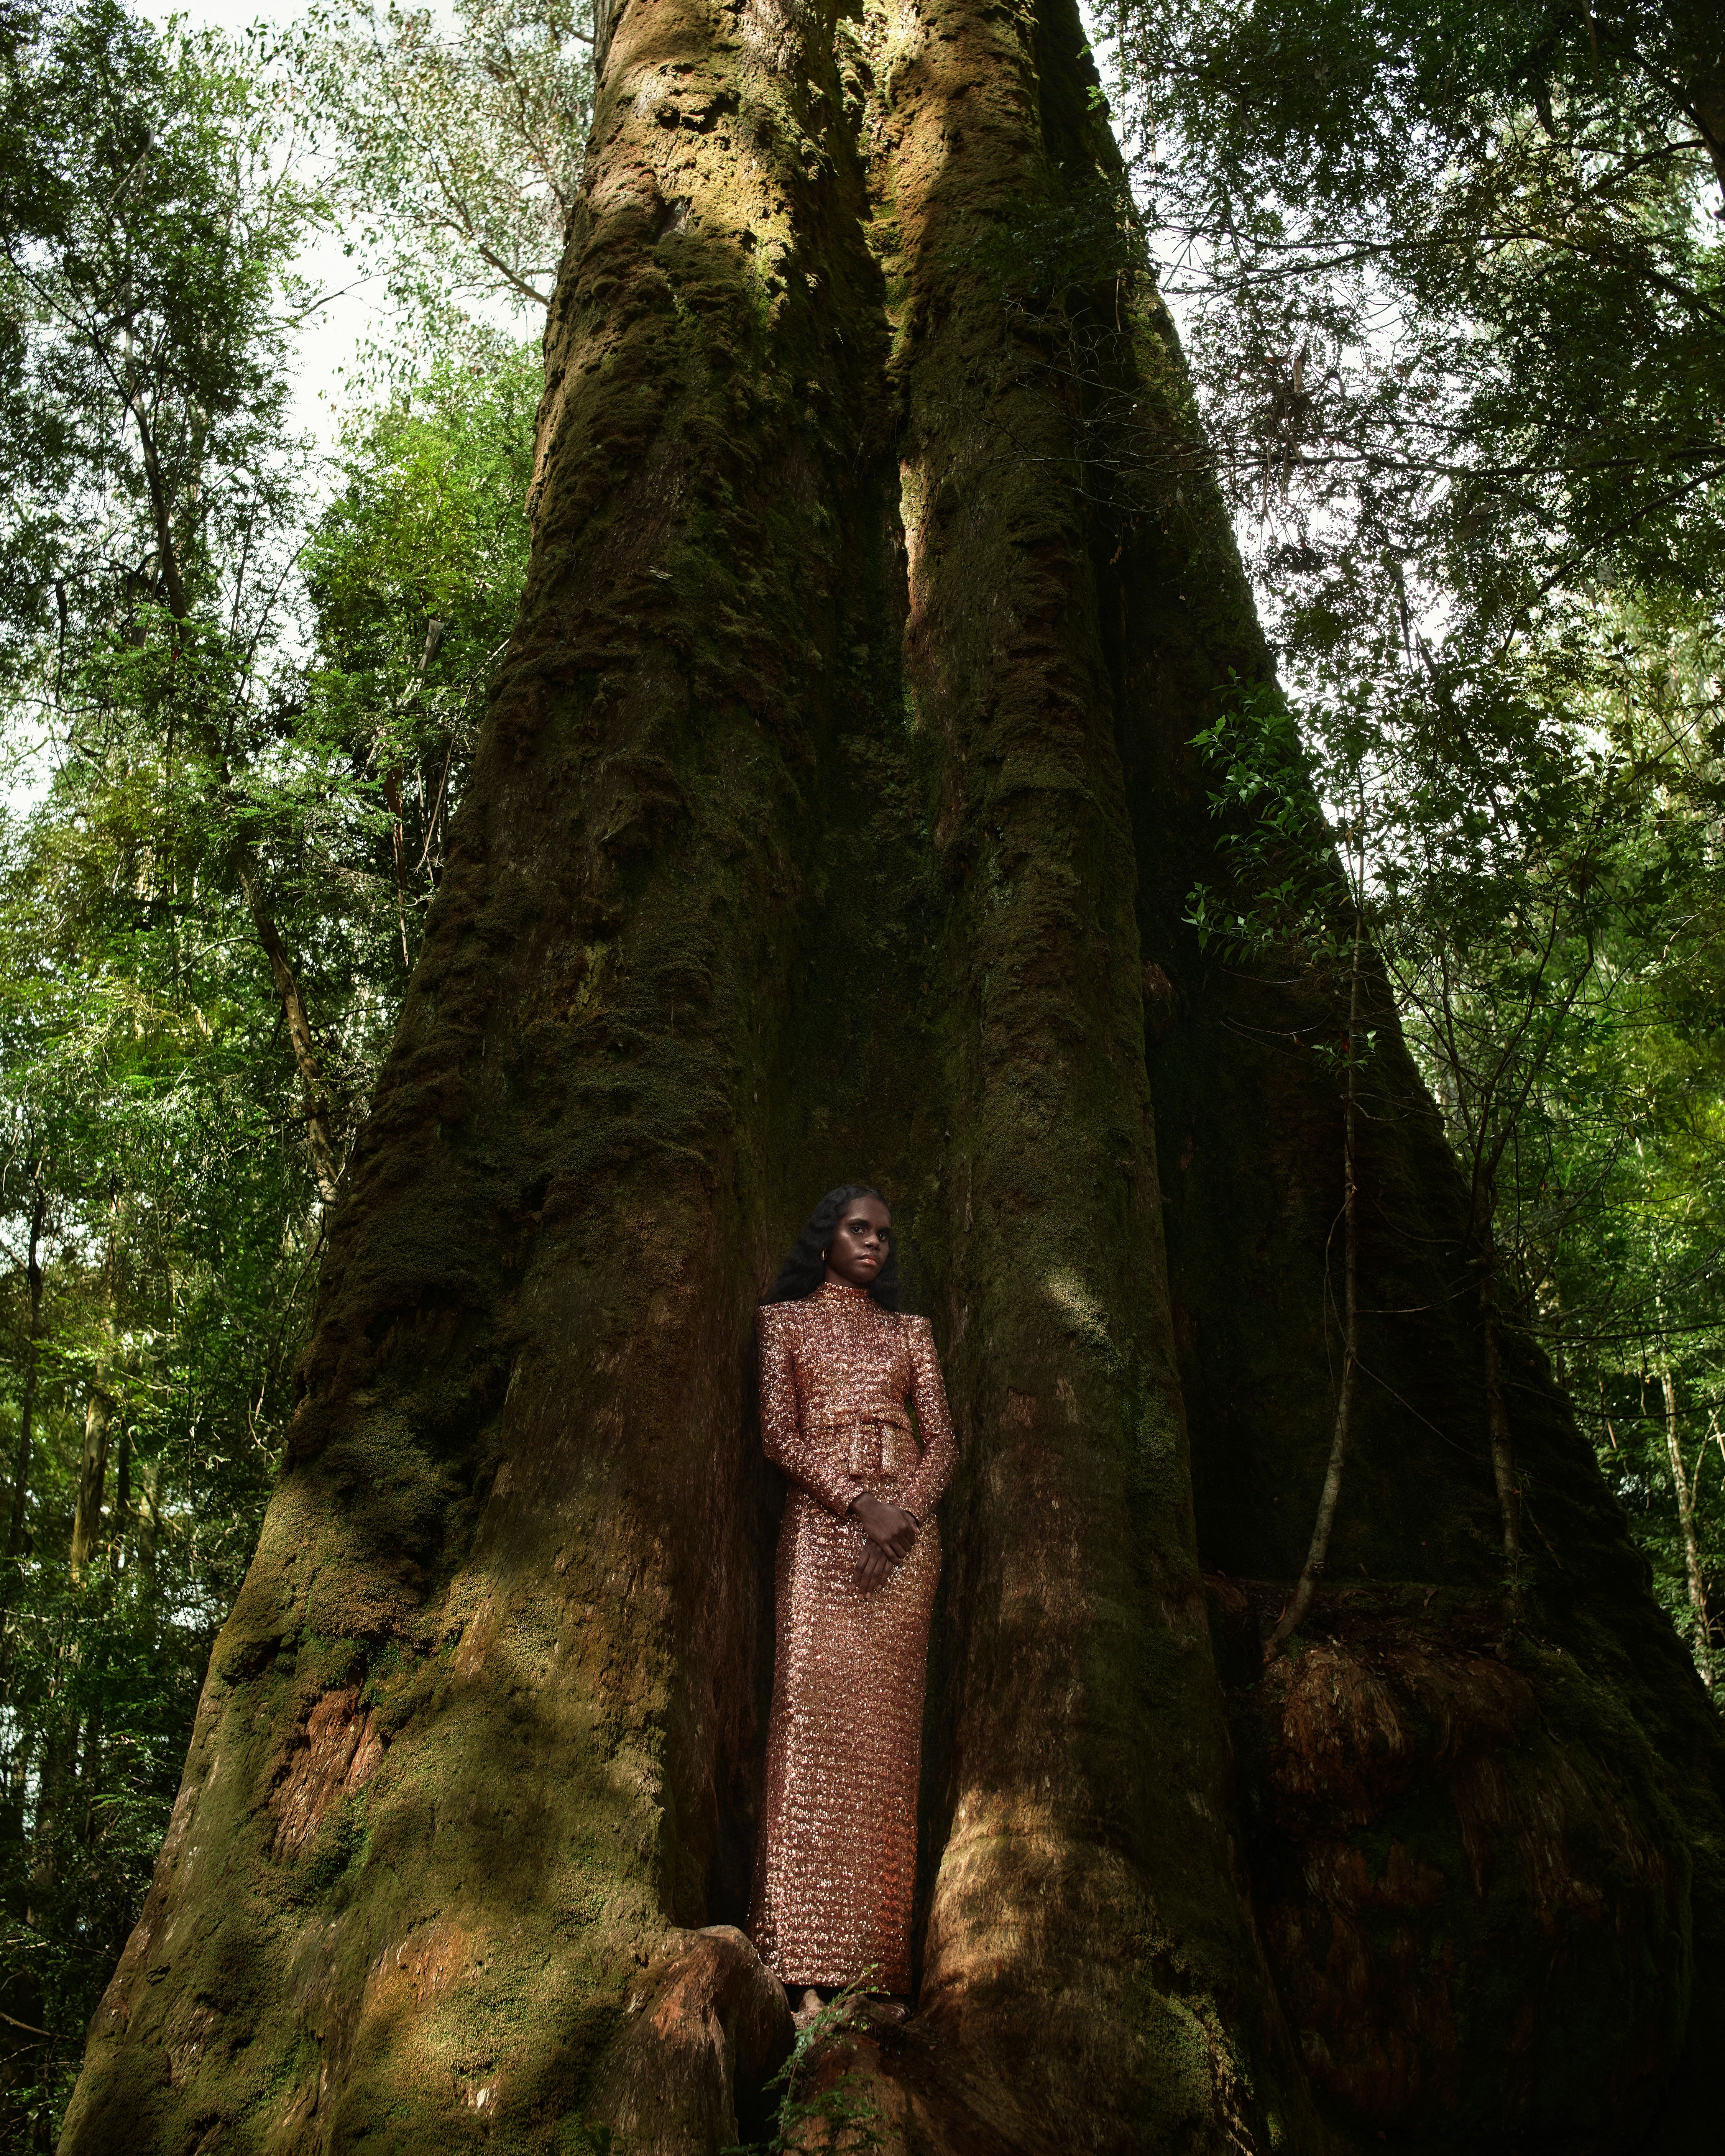 Tarlisa standing in the crook of a tree wearing a bronze-coloured sequinned gown.